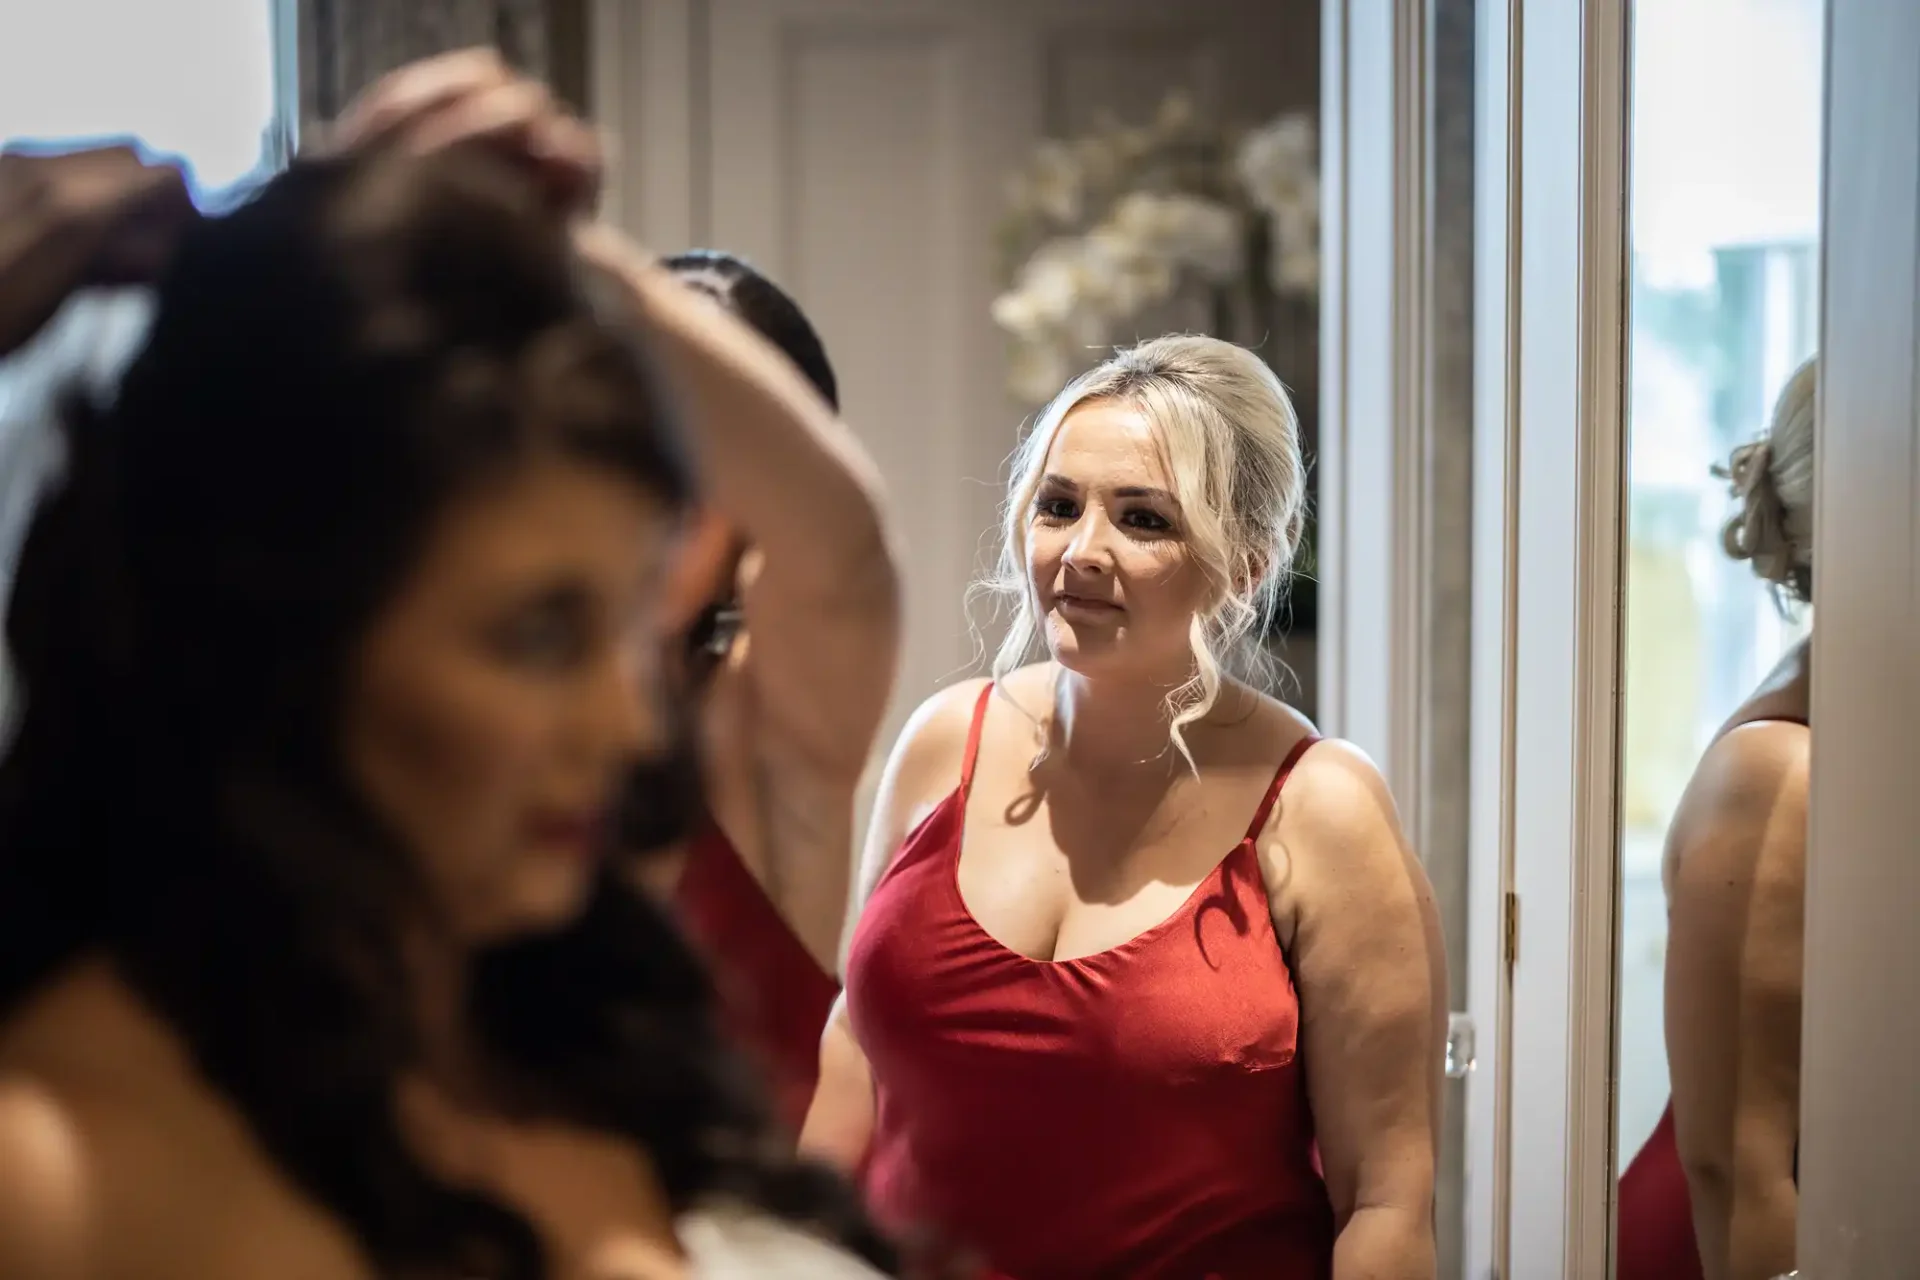 A woman in a red dress looks fondly at another woman adjusting her hair in a mirror-lit room.